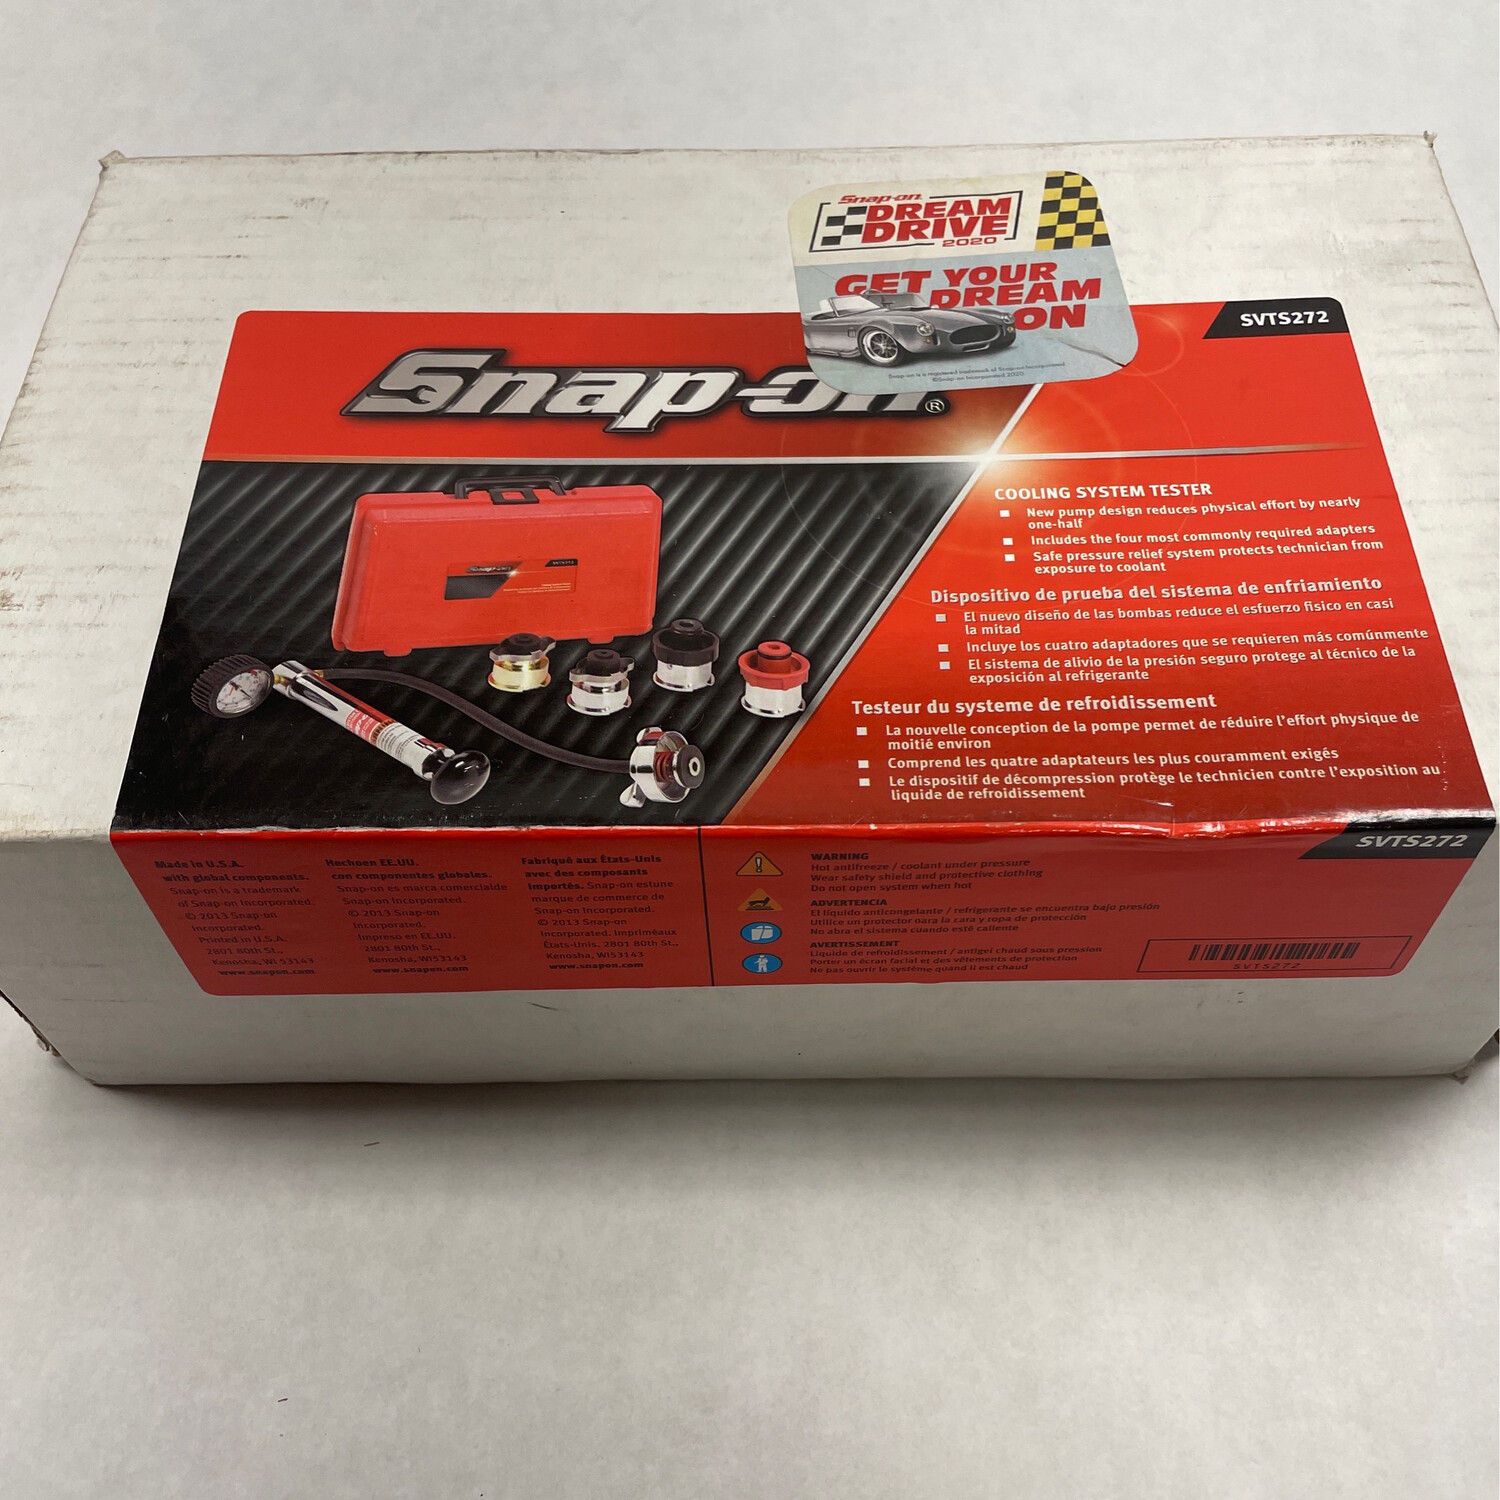 Snap On Cooling System Tester, SVTS272